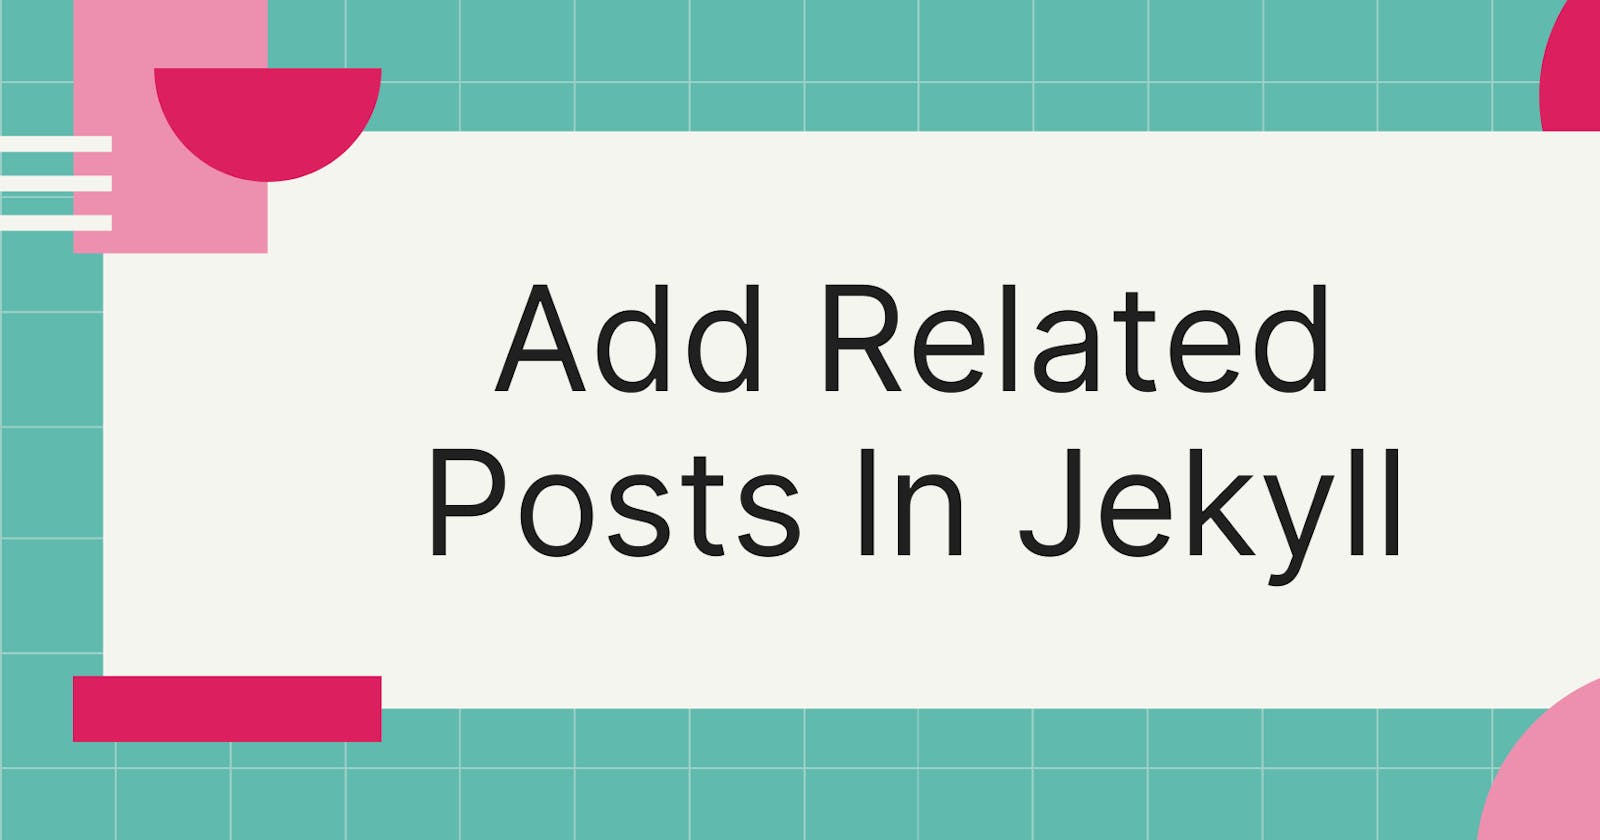 How To Add Related Posts In Jekyll To Increase Engagement